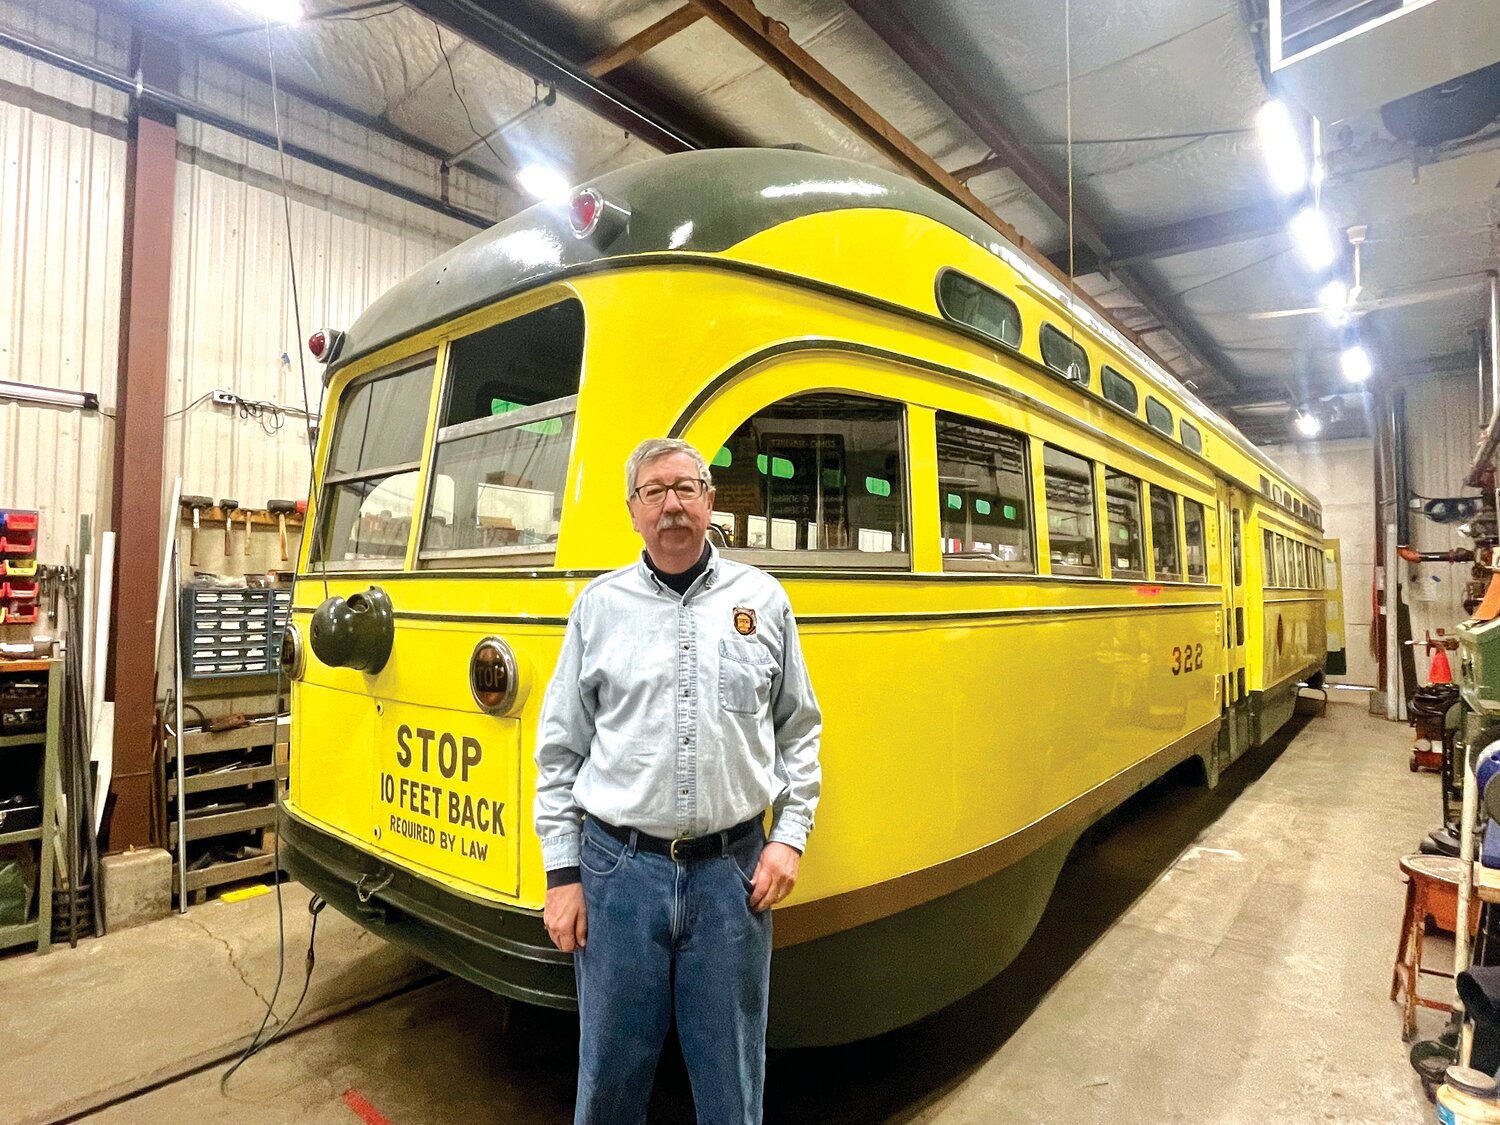 Aaron Issacs, chairman of the board of the Minnesota Streetcar Museum, stands in front of car No. 322, stored and repaired in the historic car barn. See inside this building during Doors Open Minneapolis on May 13-14. More at trolleyride.org.